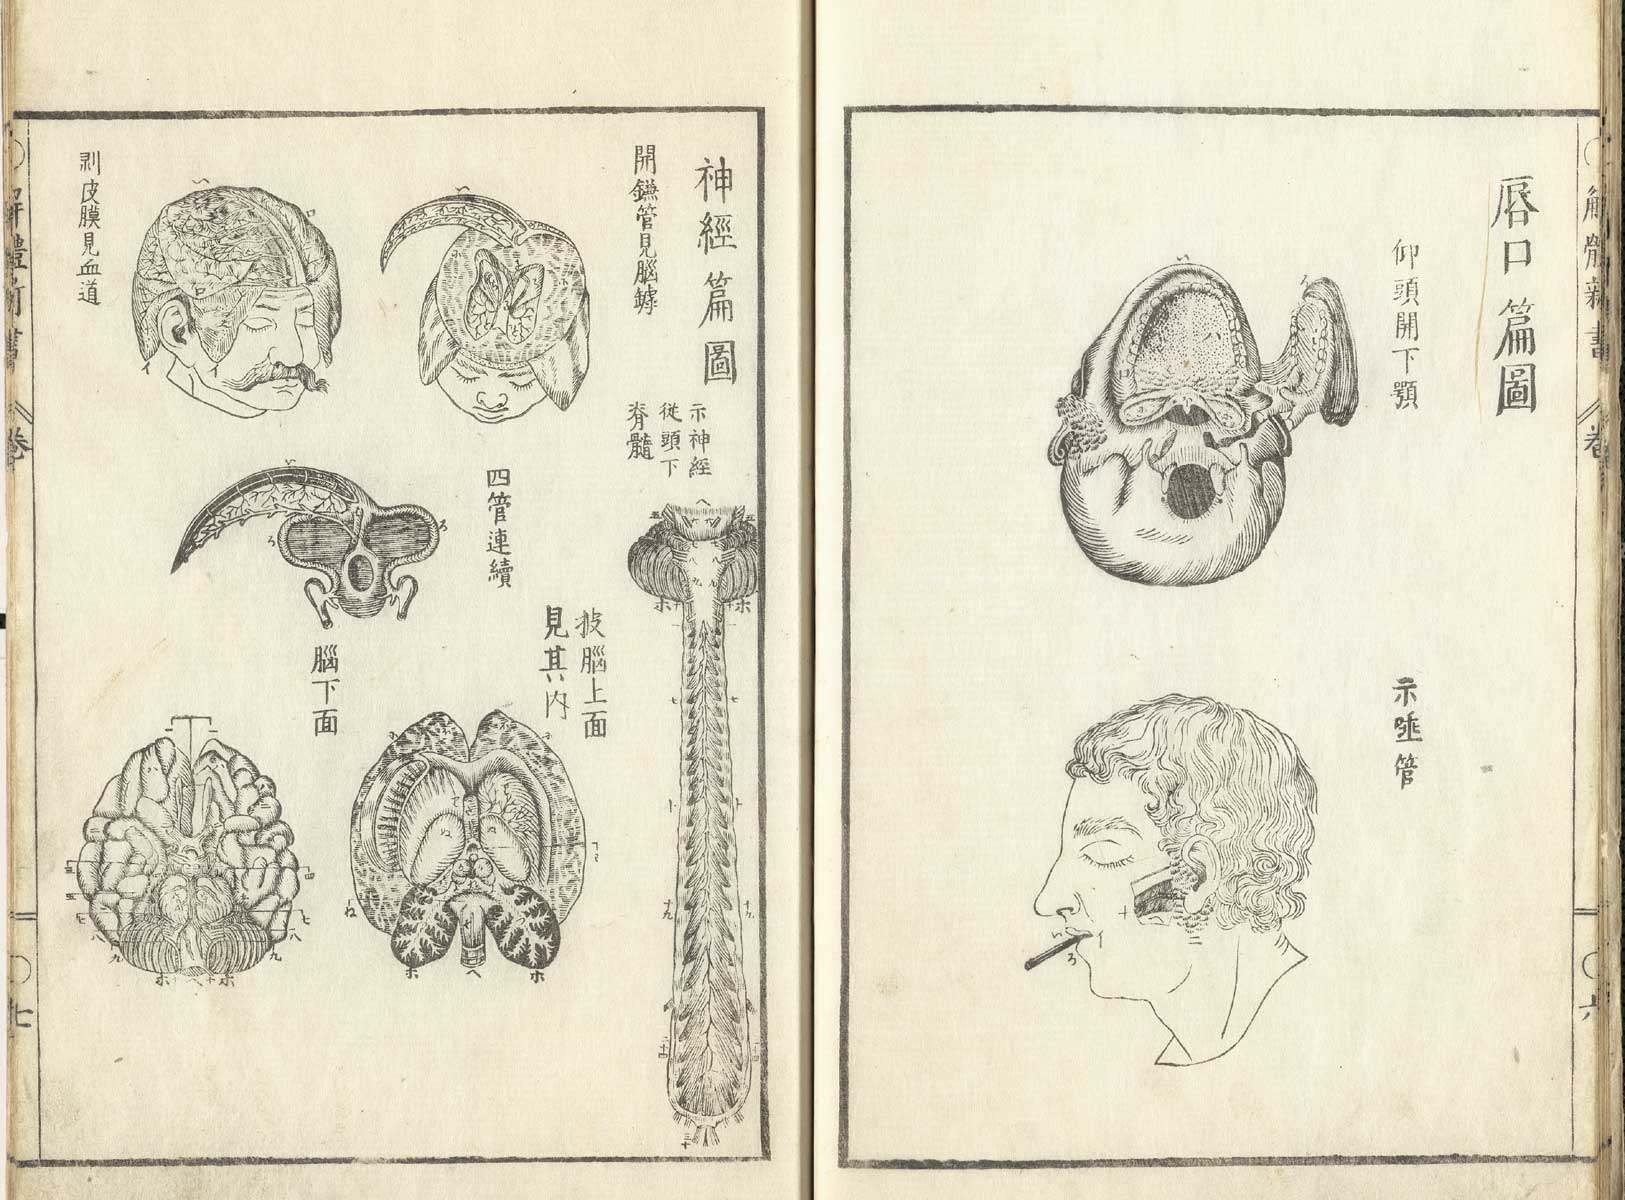 Pages 6 and 7 of Johann Adam Kulmus' Kaitai shinsho. On page 6 there are two illustrations. The top illustration is a view of the head from the base of the skull with the lower jaw moved to the right side. The bottom illustration is a view of the left side of a head with a flap of skin in the cheek cut open to allow a string through the mouth to the cheek. On page 7 are illustrations of two heads with the brain exposed as well as cross sections of the brain.